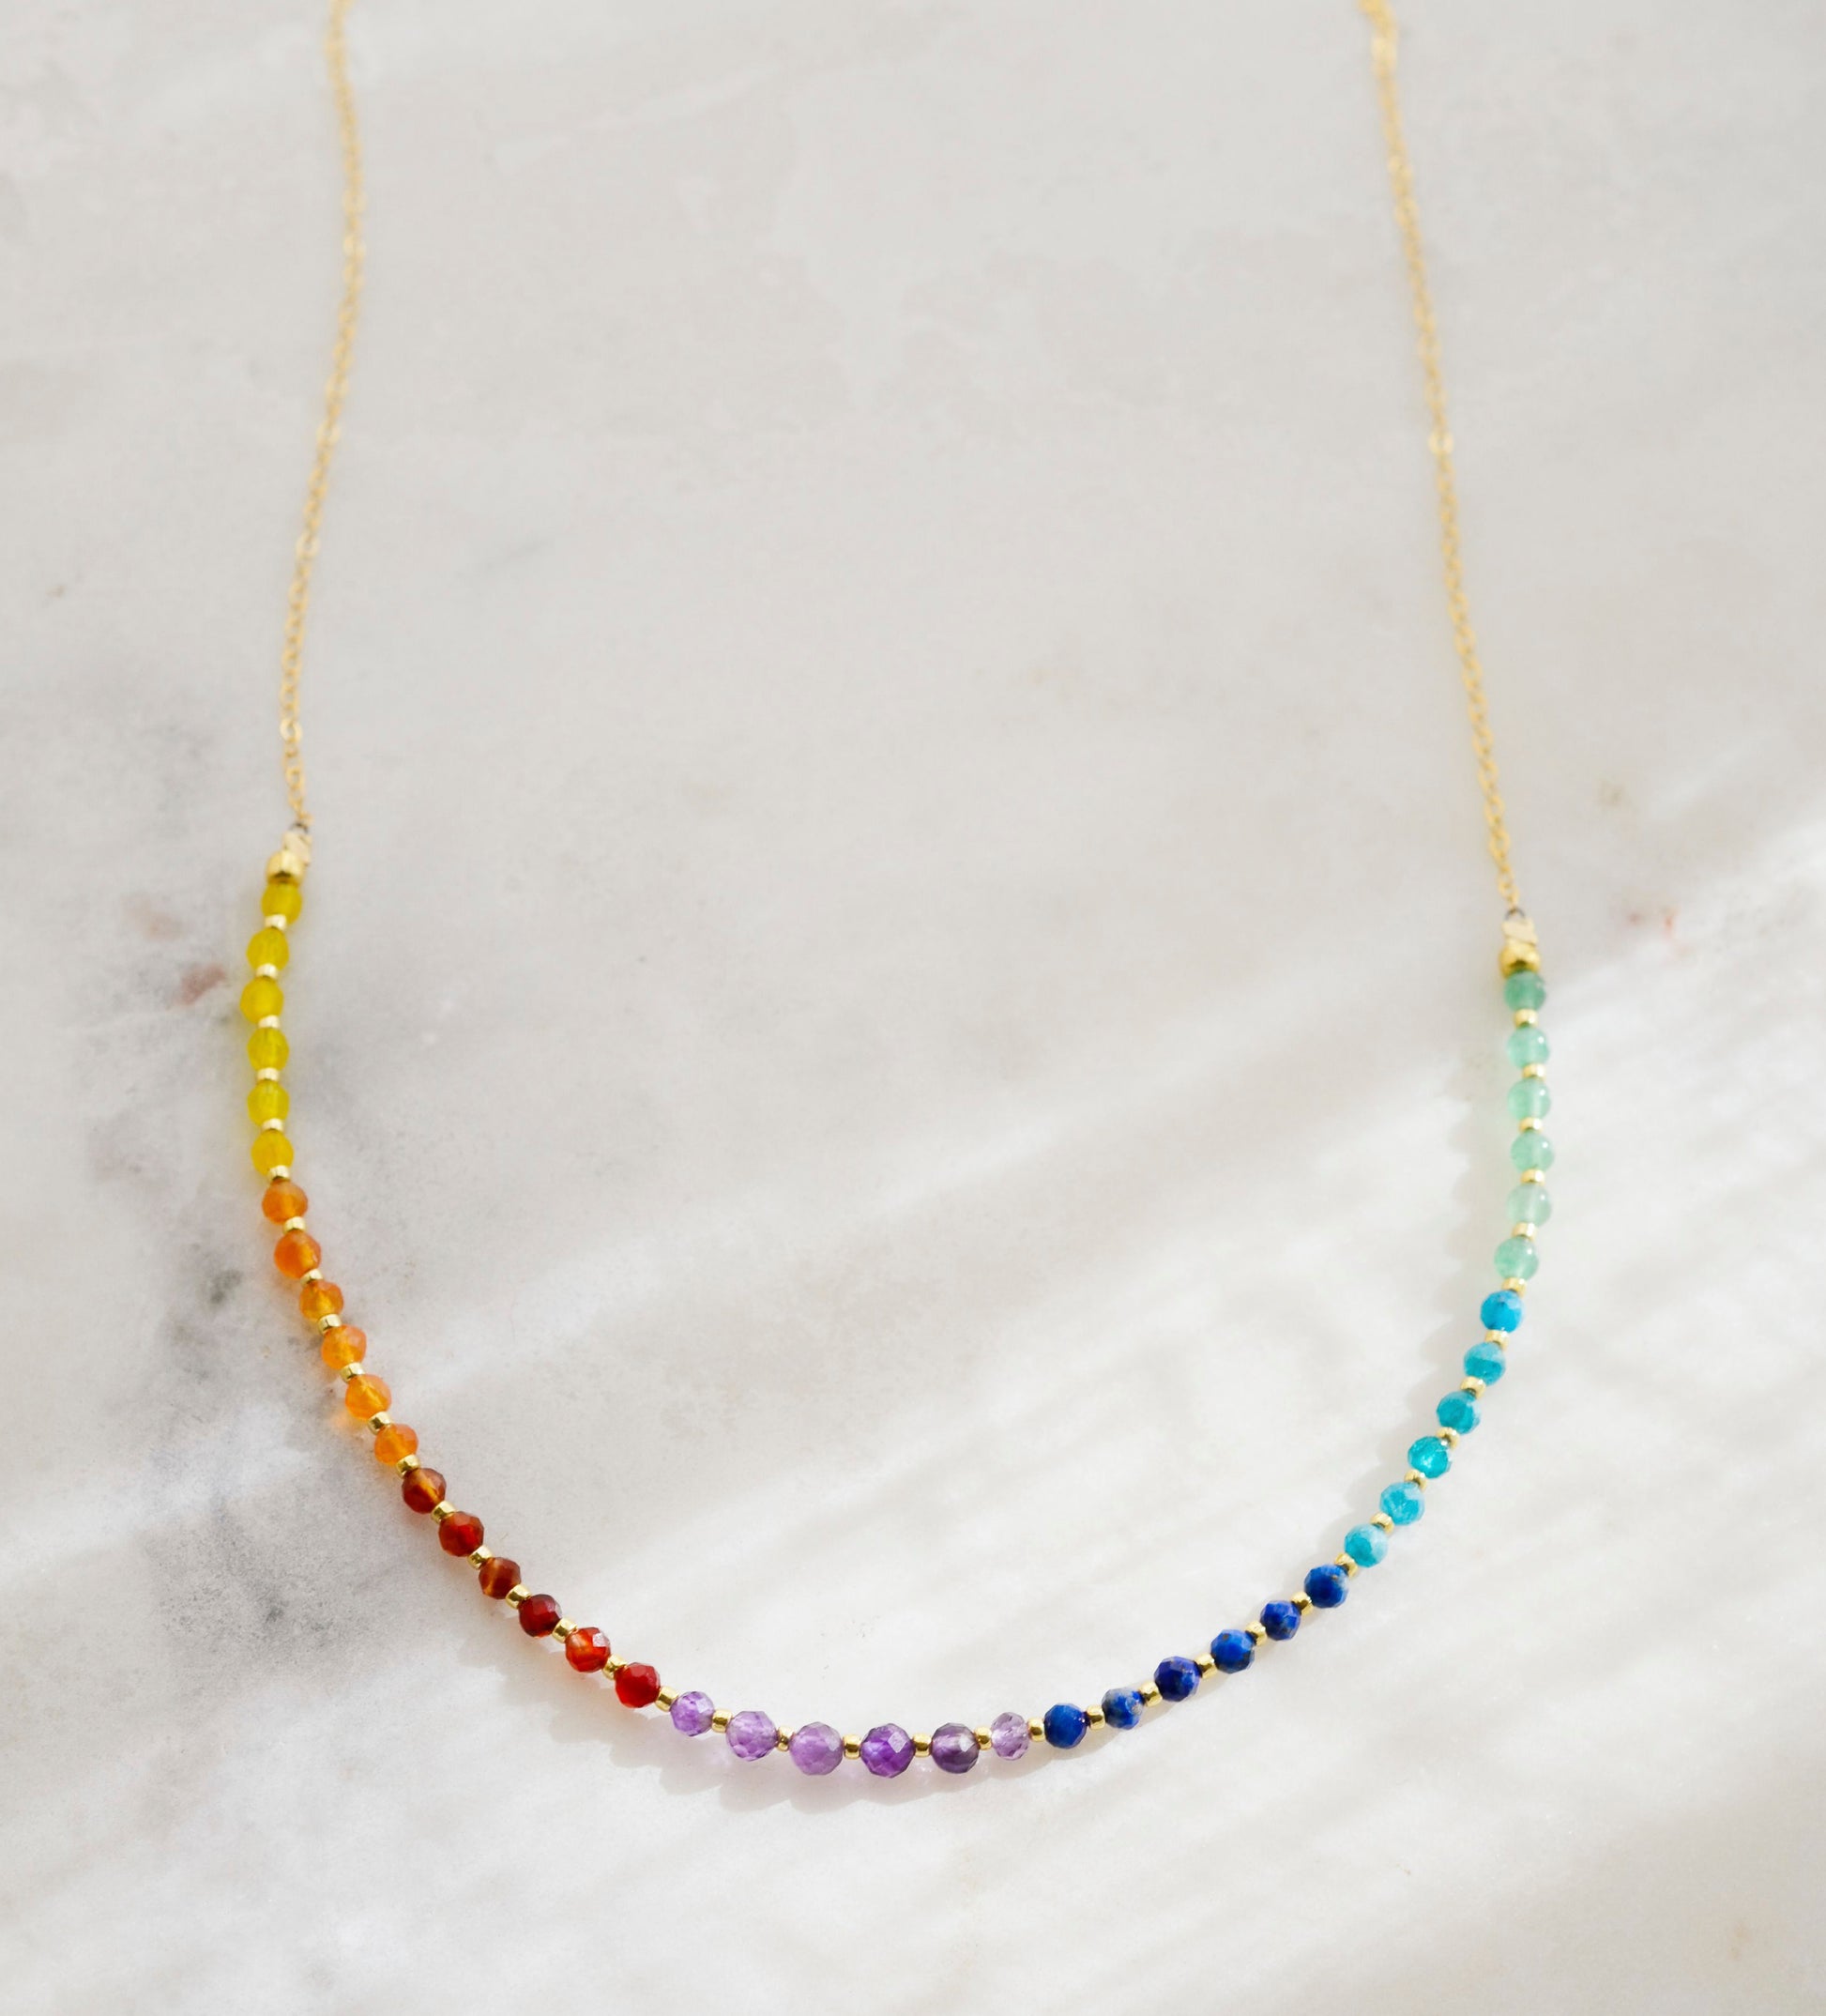 The single rainbow style is shown in 14k gold filled.